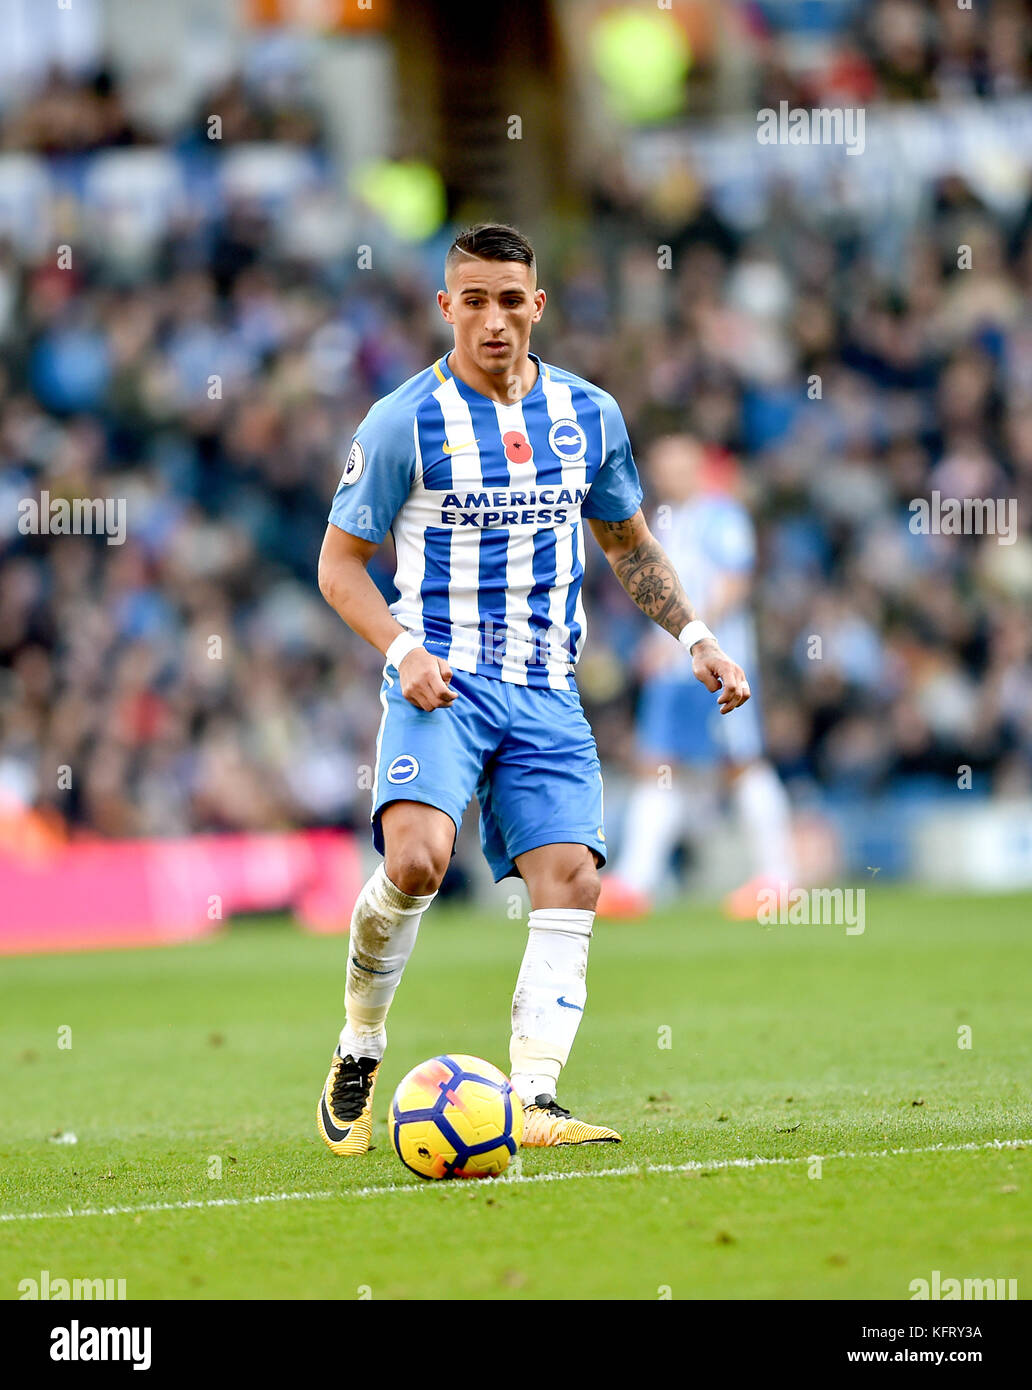 Anthony Knockaert of Brighton during Premier League match between Brighton and Hove Albion and Southampton at the American Express Community Stadium in Brighton and Hove. 29 Oct 2017 - Editorial use only. No merchandising. For Football images FA and Premier League restrictions apply inc. no internet/mobile usage without FAPL license - for details contact Football Dataco Stock Photo